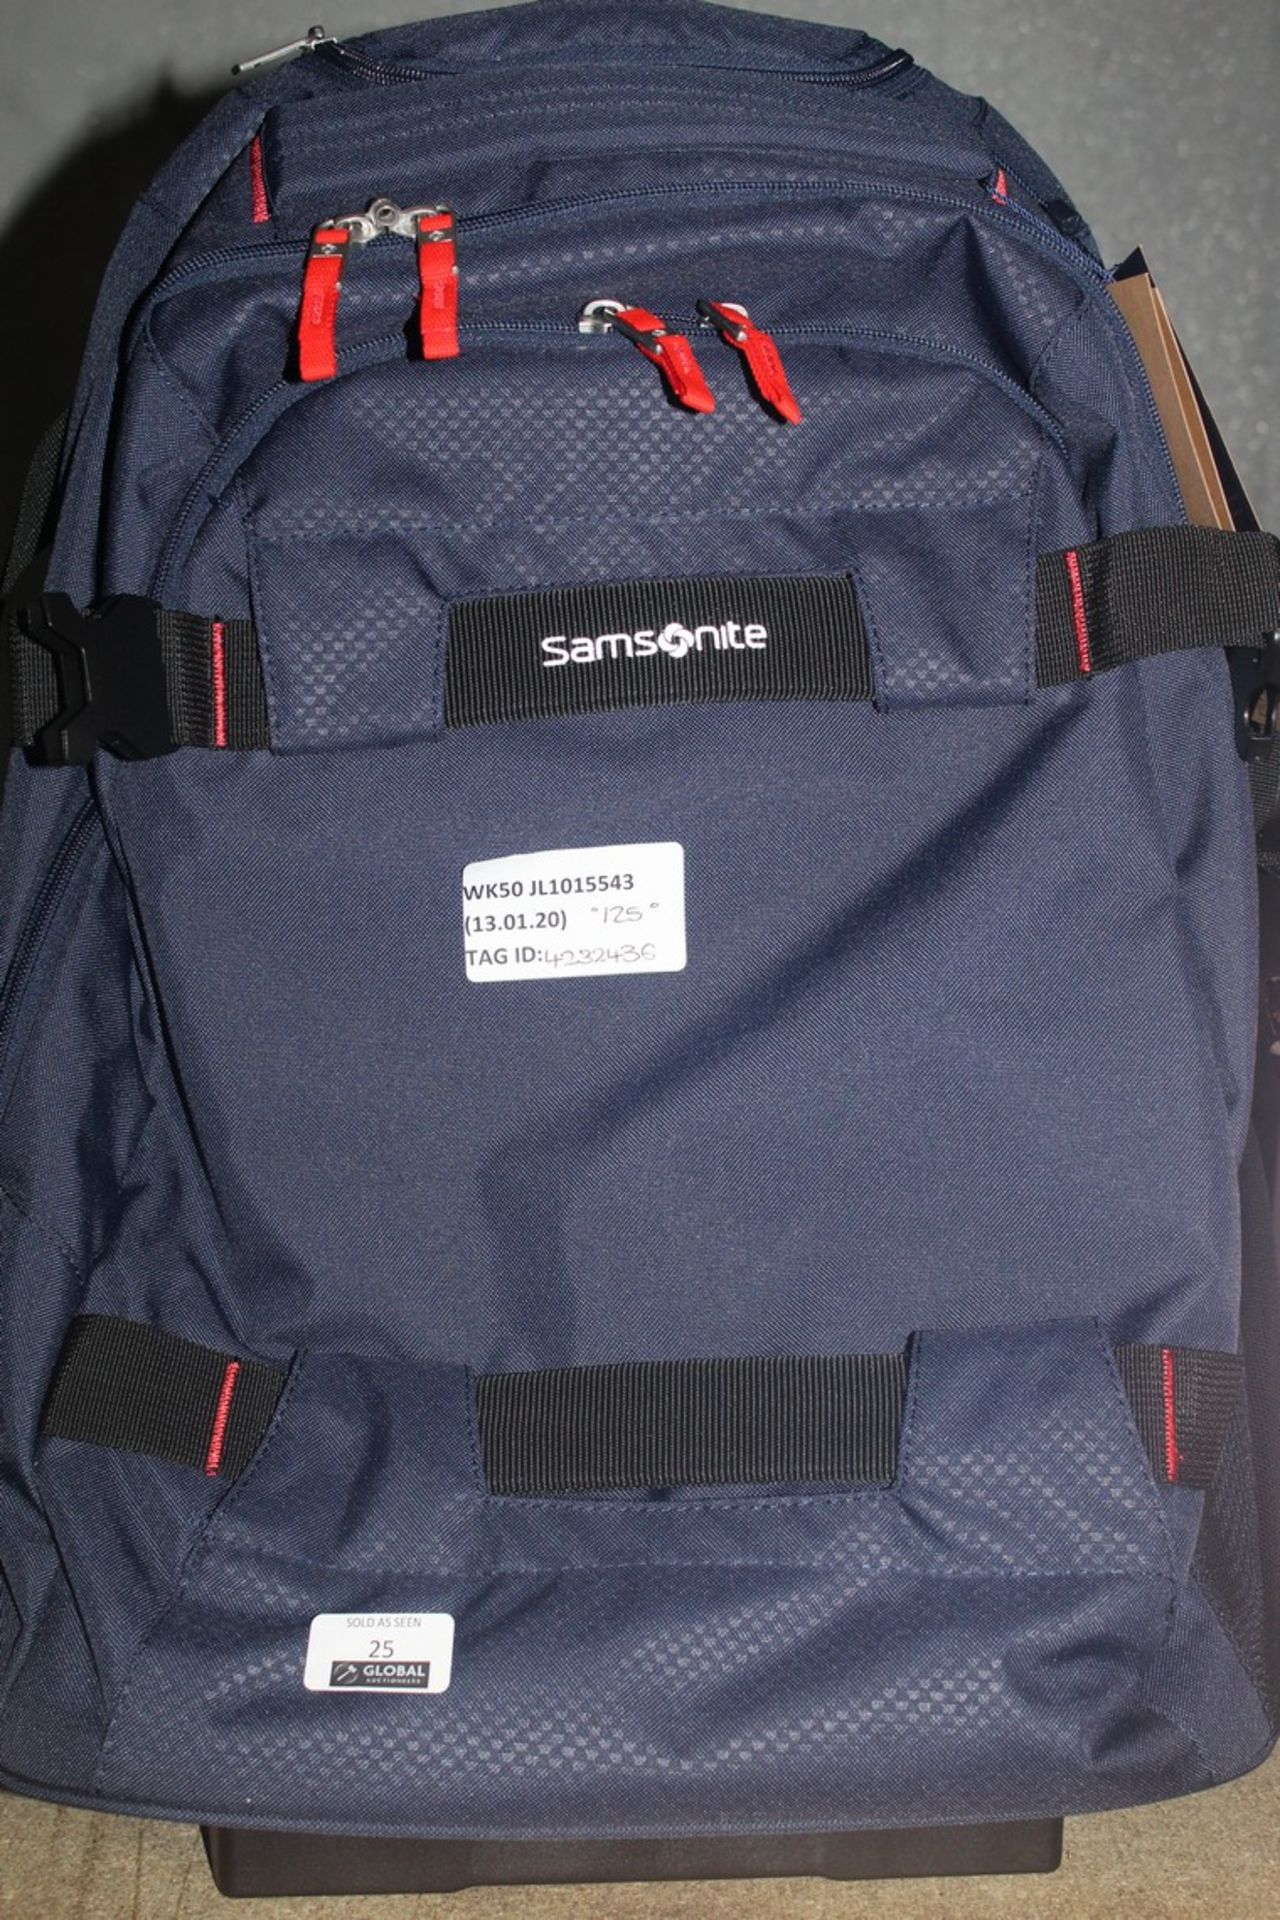 Samsonite Soft Shell Laptop Backpack in Midnight Blue RRP £125 (4232436) (Public Viewing and